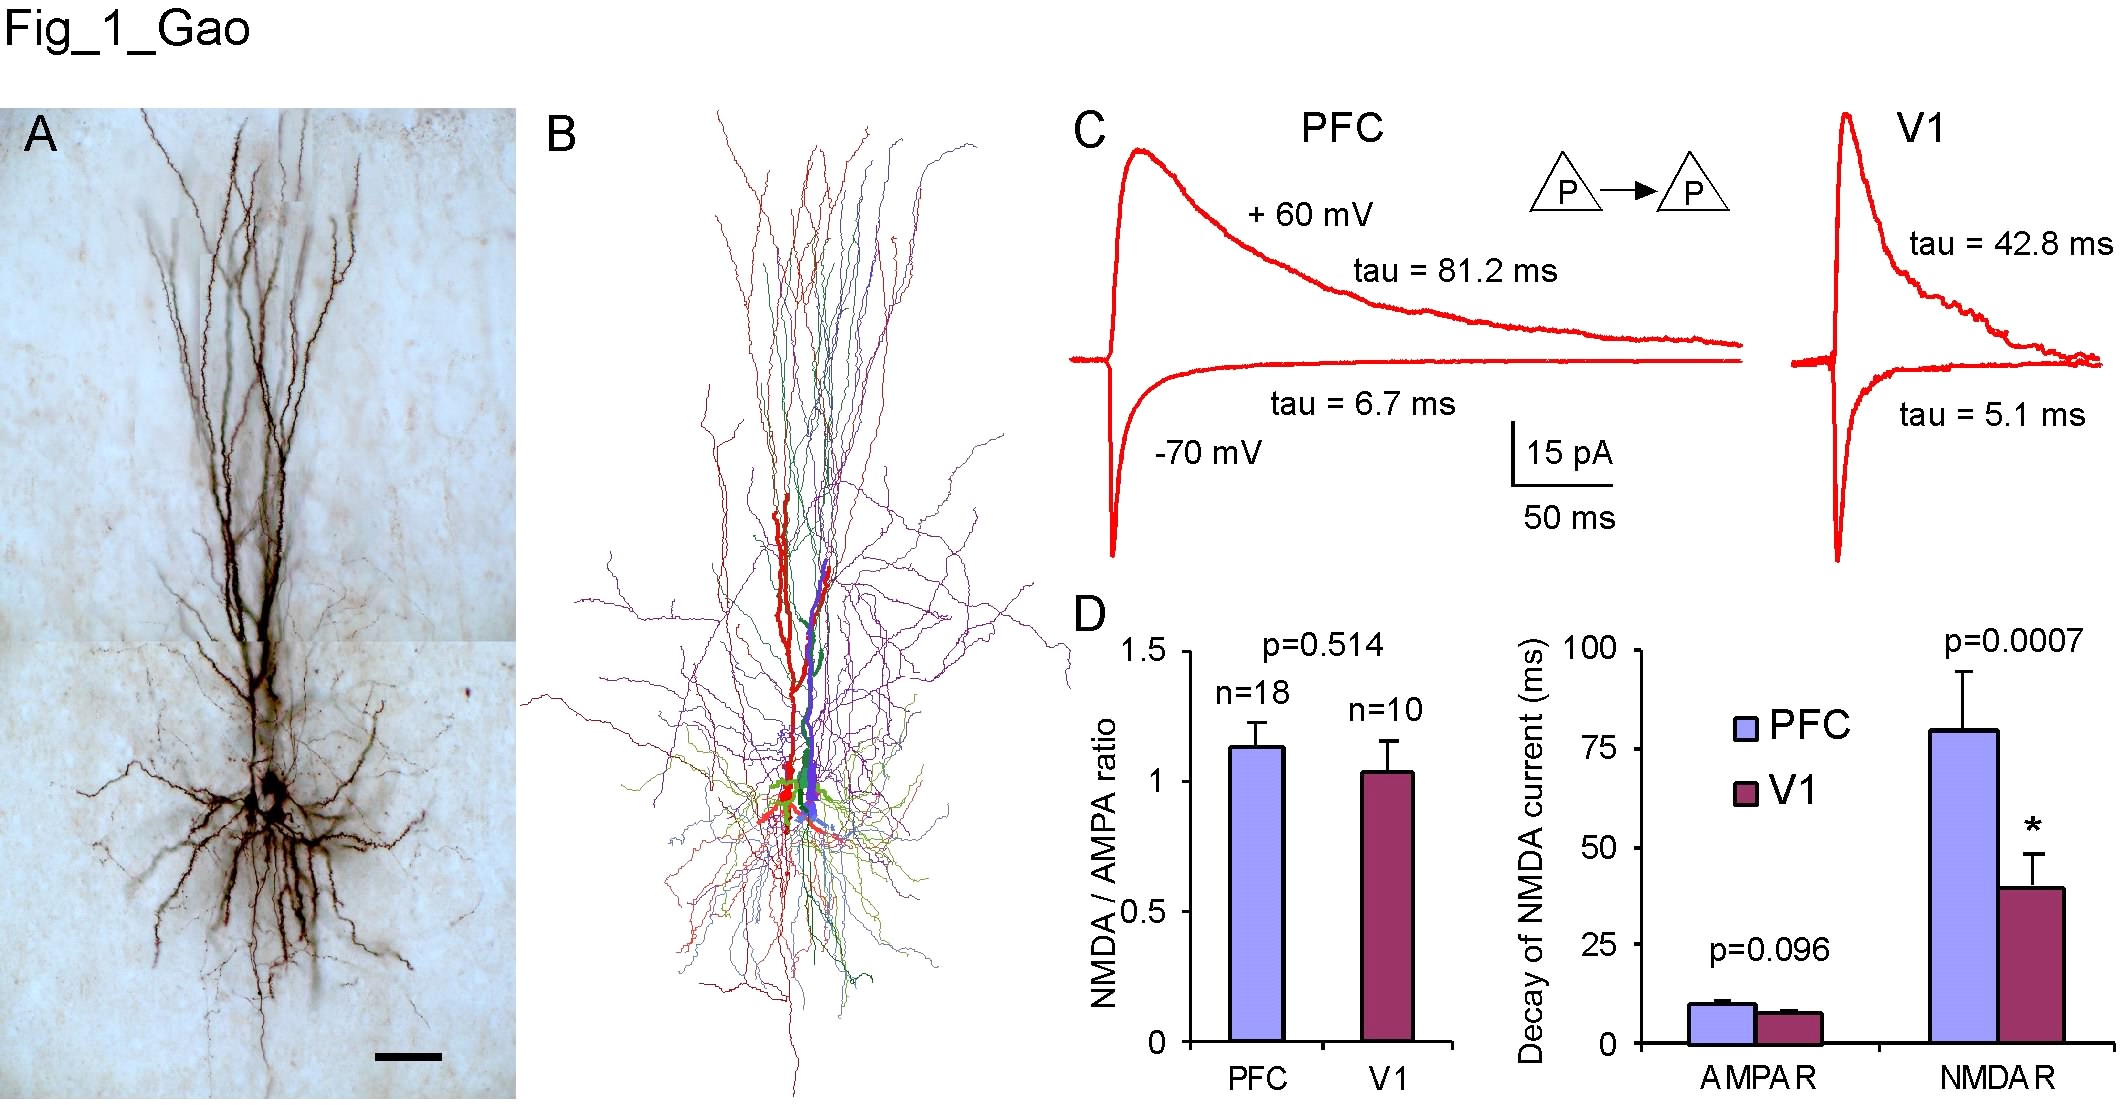 A and B, Biocytin-labeled layer 5 pyramidal neurons from multiple recordings and Neurolucida reconstruction, respectively; C and D, NMDA and AMPA receptor-mediaed currents recorded from the monosynaptic connections between pyramidal neurons in the adult rat prefrontal cortex.